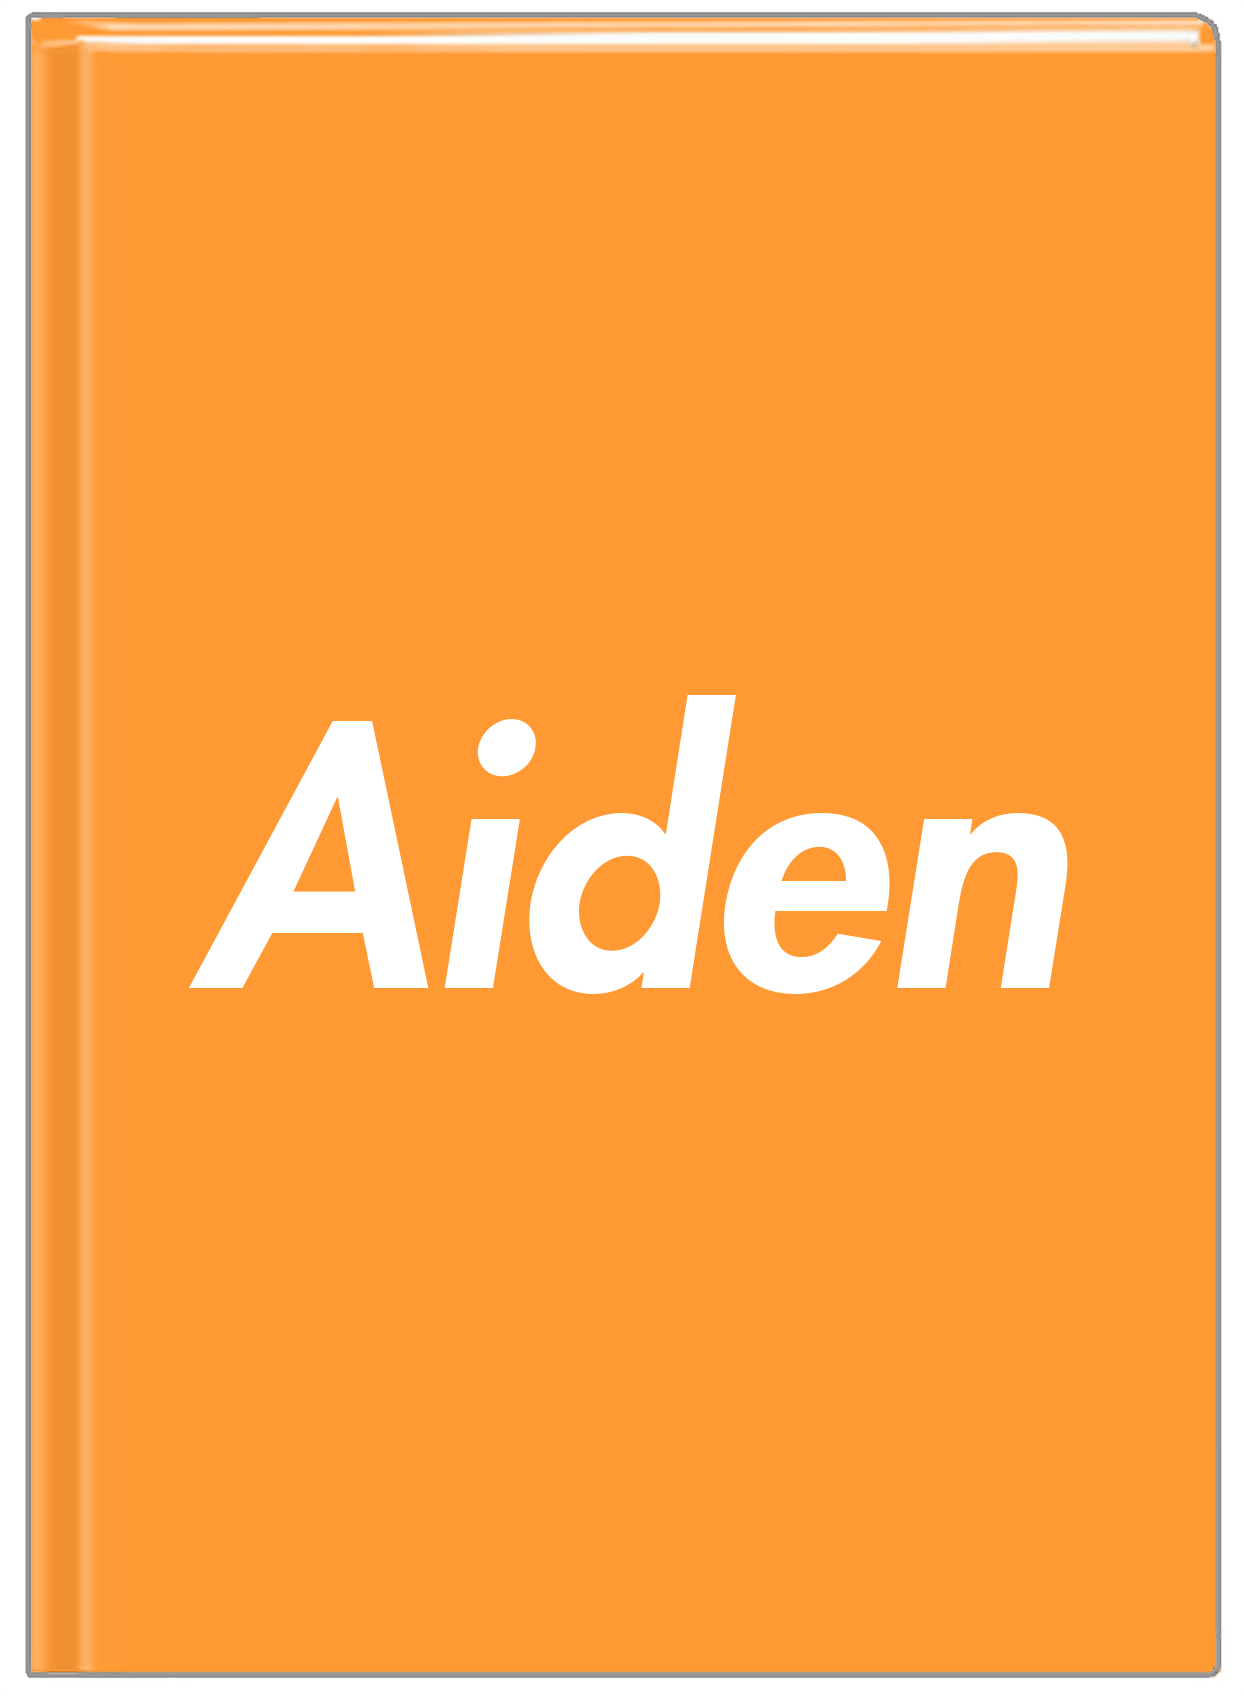 Personalized Solid Color Journal - Orange Background - Front View